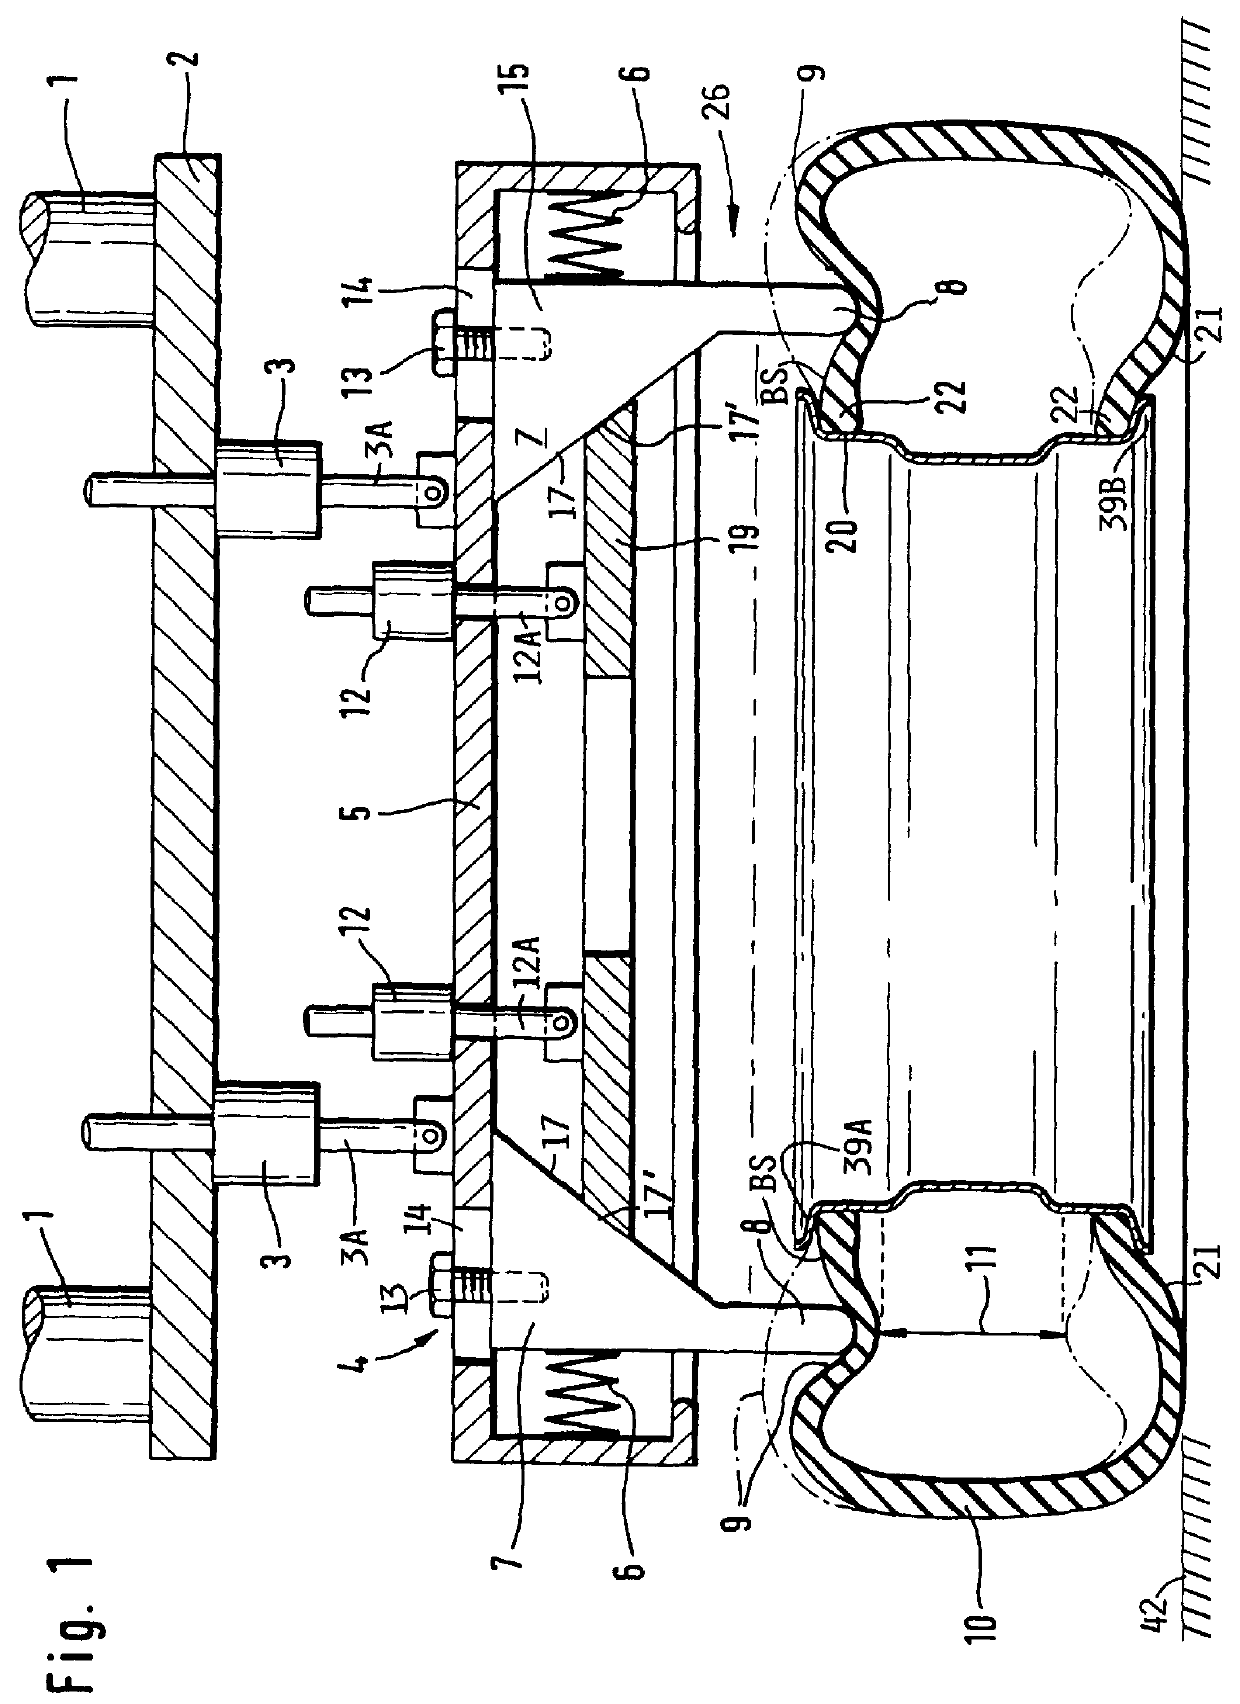 Apparatus for improving the running quality of air tire vehicle wheels